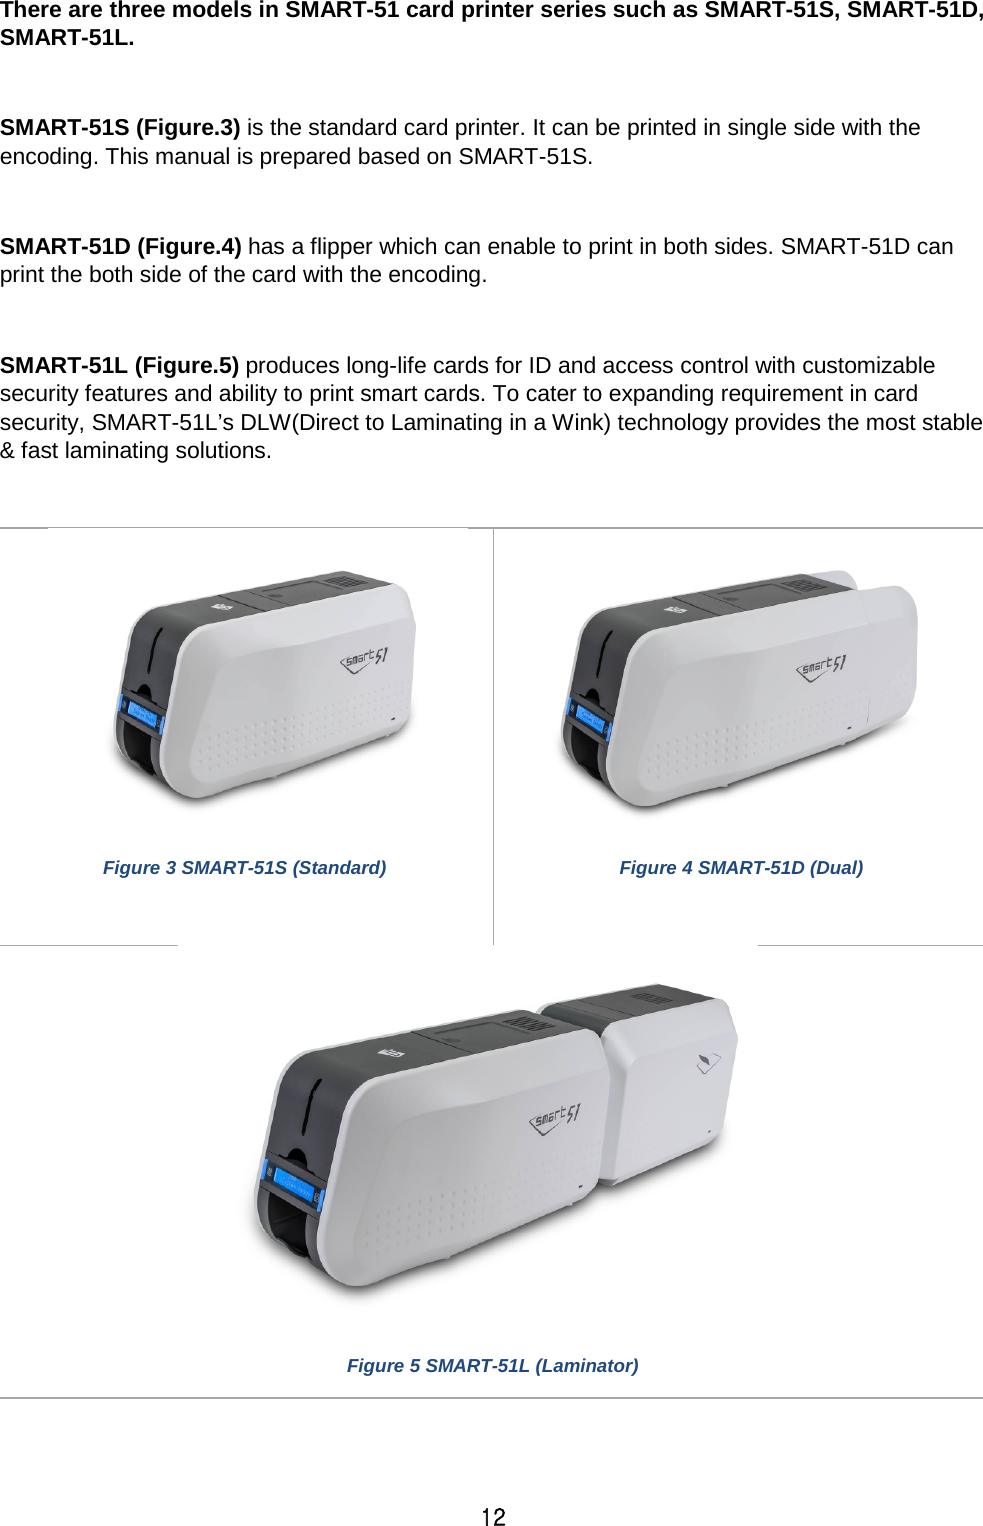 12 There are three models in SMART-51 card printer series such as SMART-51S, SMART-51D, SMART-51L.      SMART-51S (Figure.3) is the standard card printer. It can be printed in single side with the encoding. This manual is prepared based on SMART-51S.  SMART-51D (Figure.4) has a flipper which can enable to print in both sides. SMART-51D can print the both side of the card with the encoding.  SMART-51L (Figure.5) produces long-life cards for ID and access control with customizable security features and ability to print smart cards. To cater to expanding requirement in card security, SMART-51L’s DLW(Direct to Laminating in a Wink) technology provides the most stable &amp; fast laminating solutions.   Figure 3 SMART-51S (Standard)   Figure 4 SMART-51D (Dual)   Figure 5 SMART-51L (Laminator) 